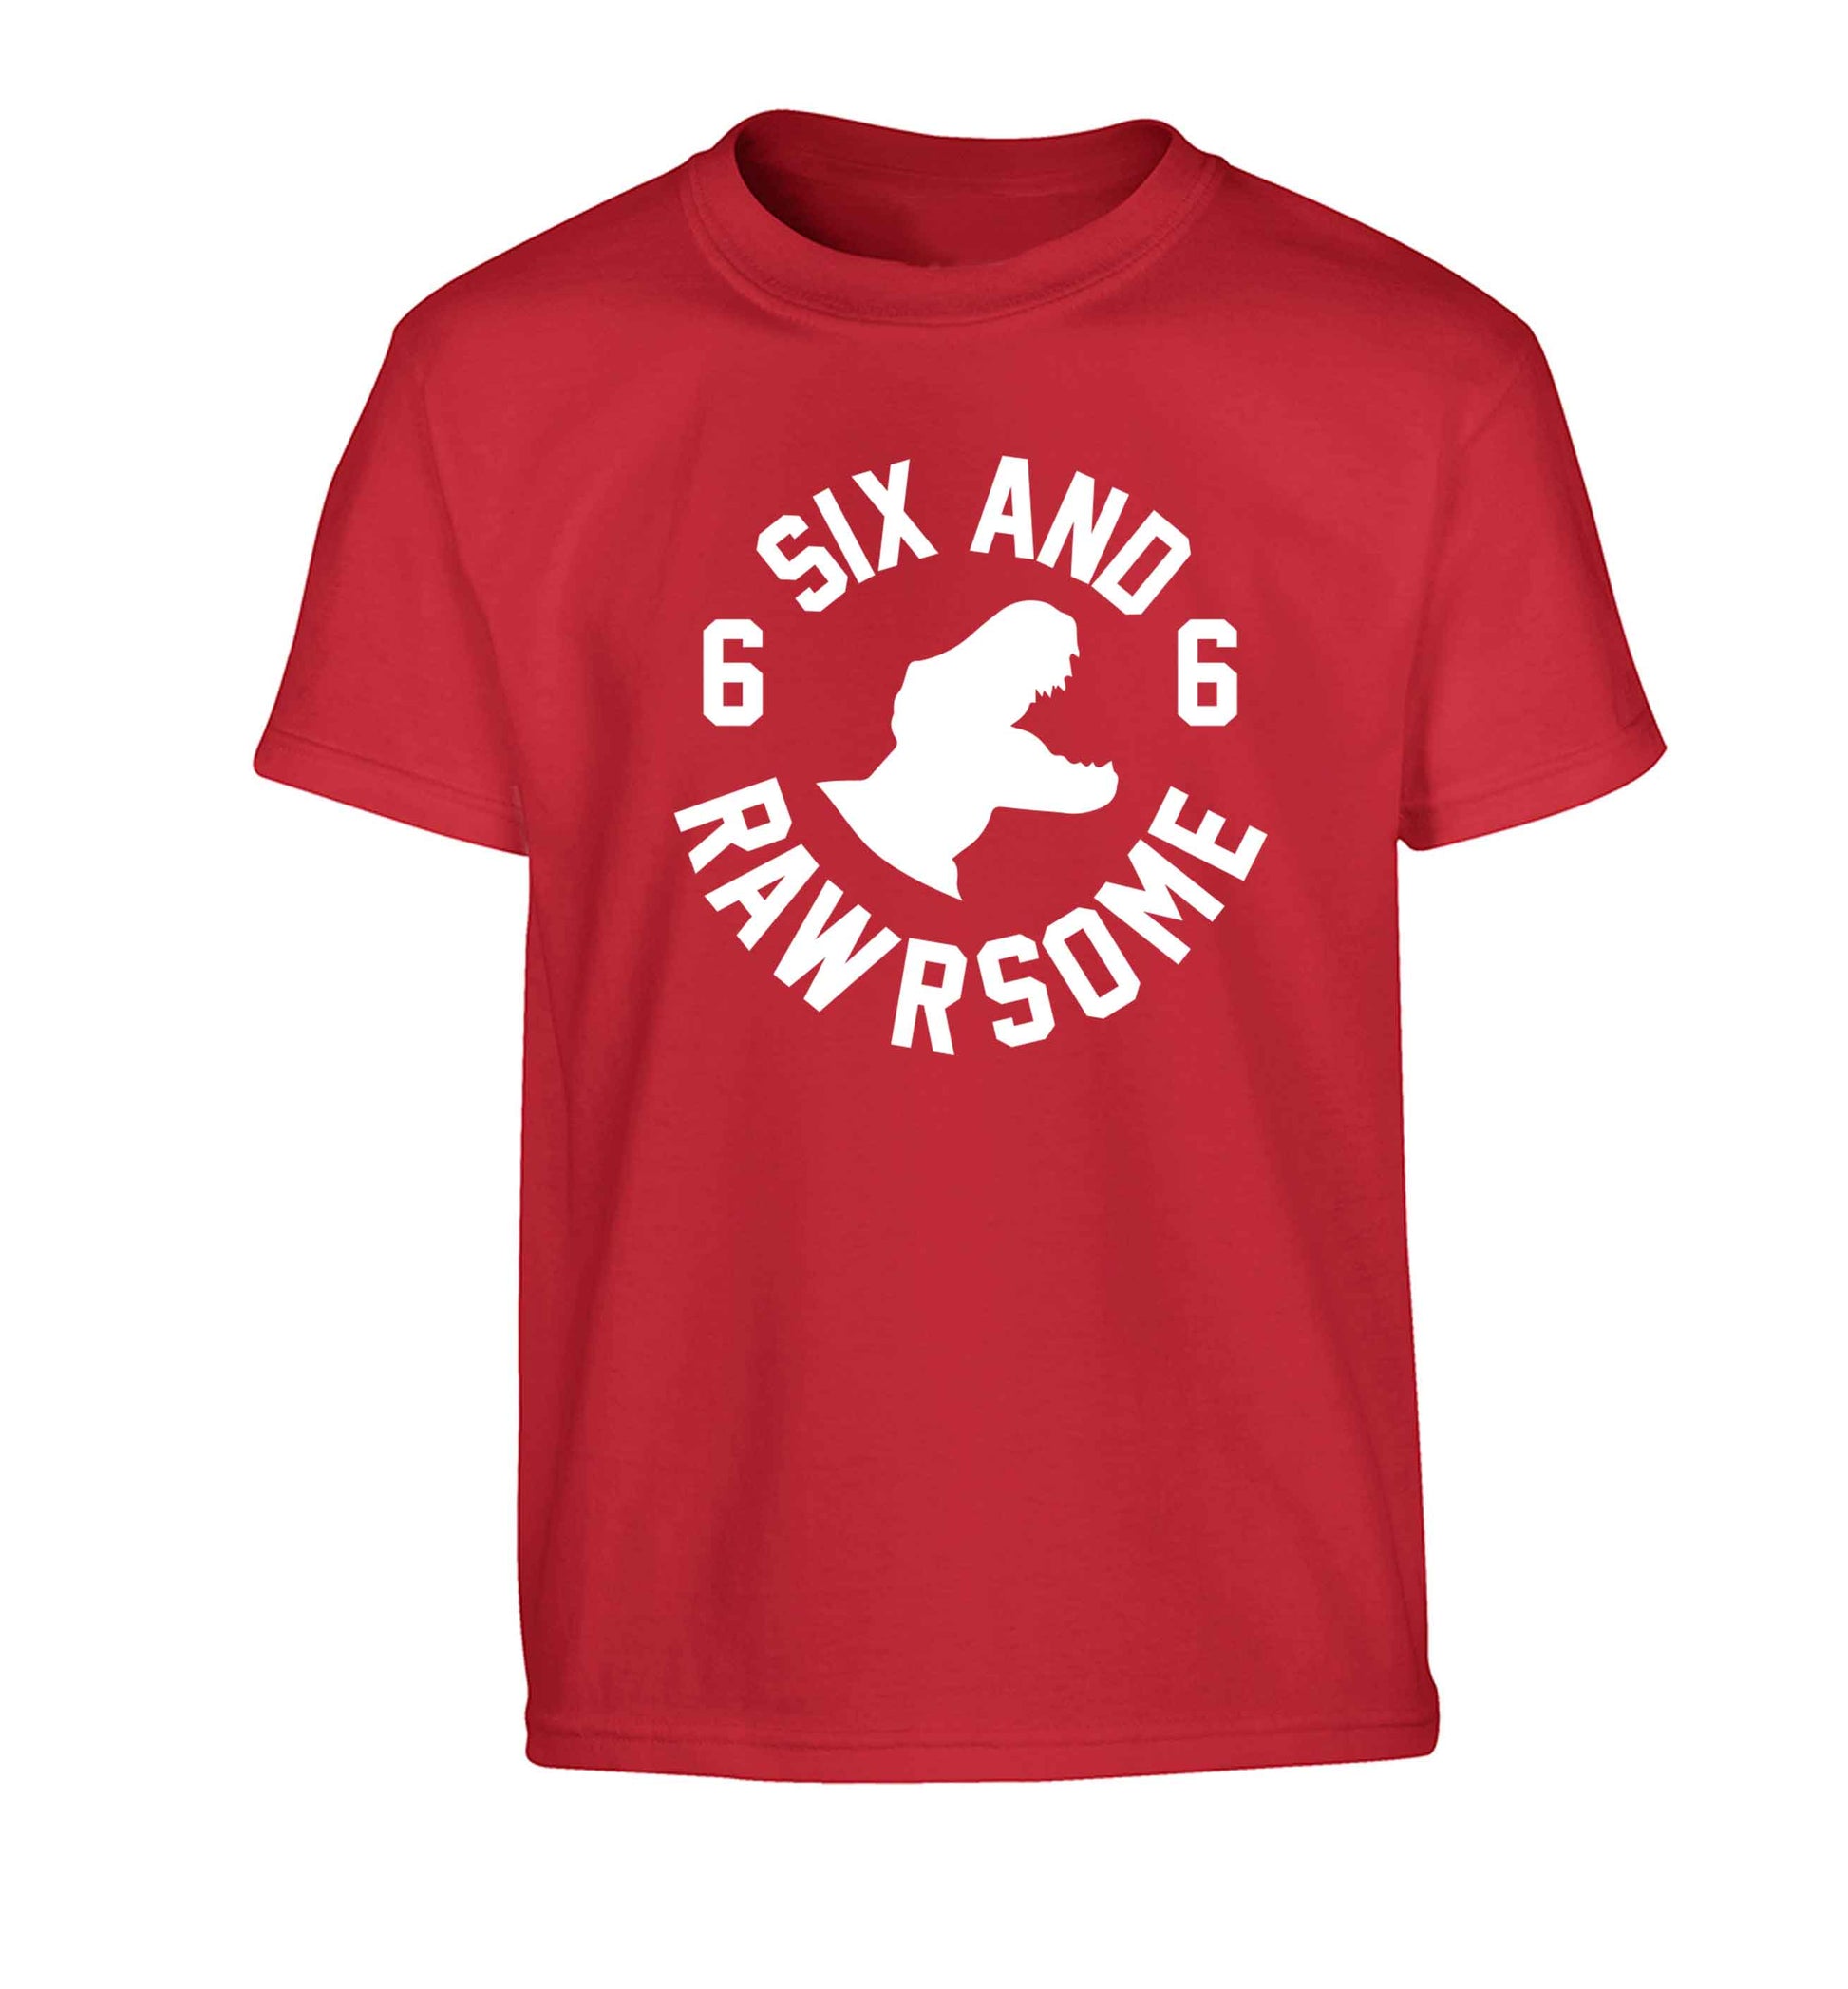 Six and rawrsome Children's red Tshirt 12-13 Years